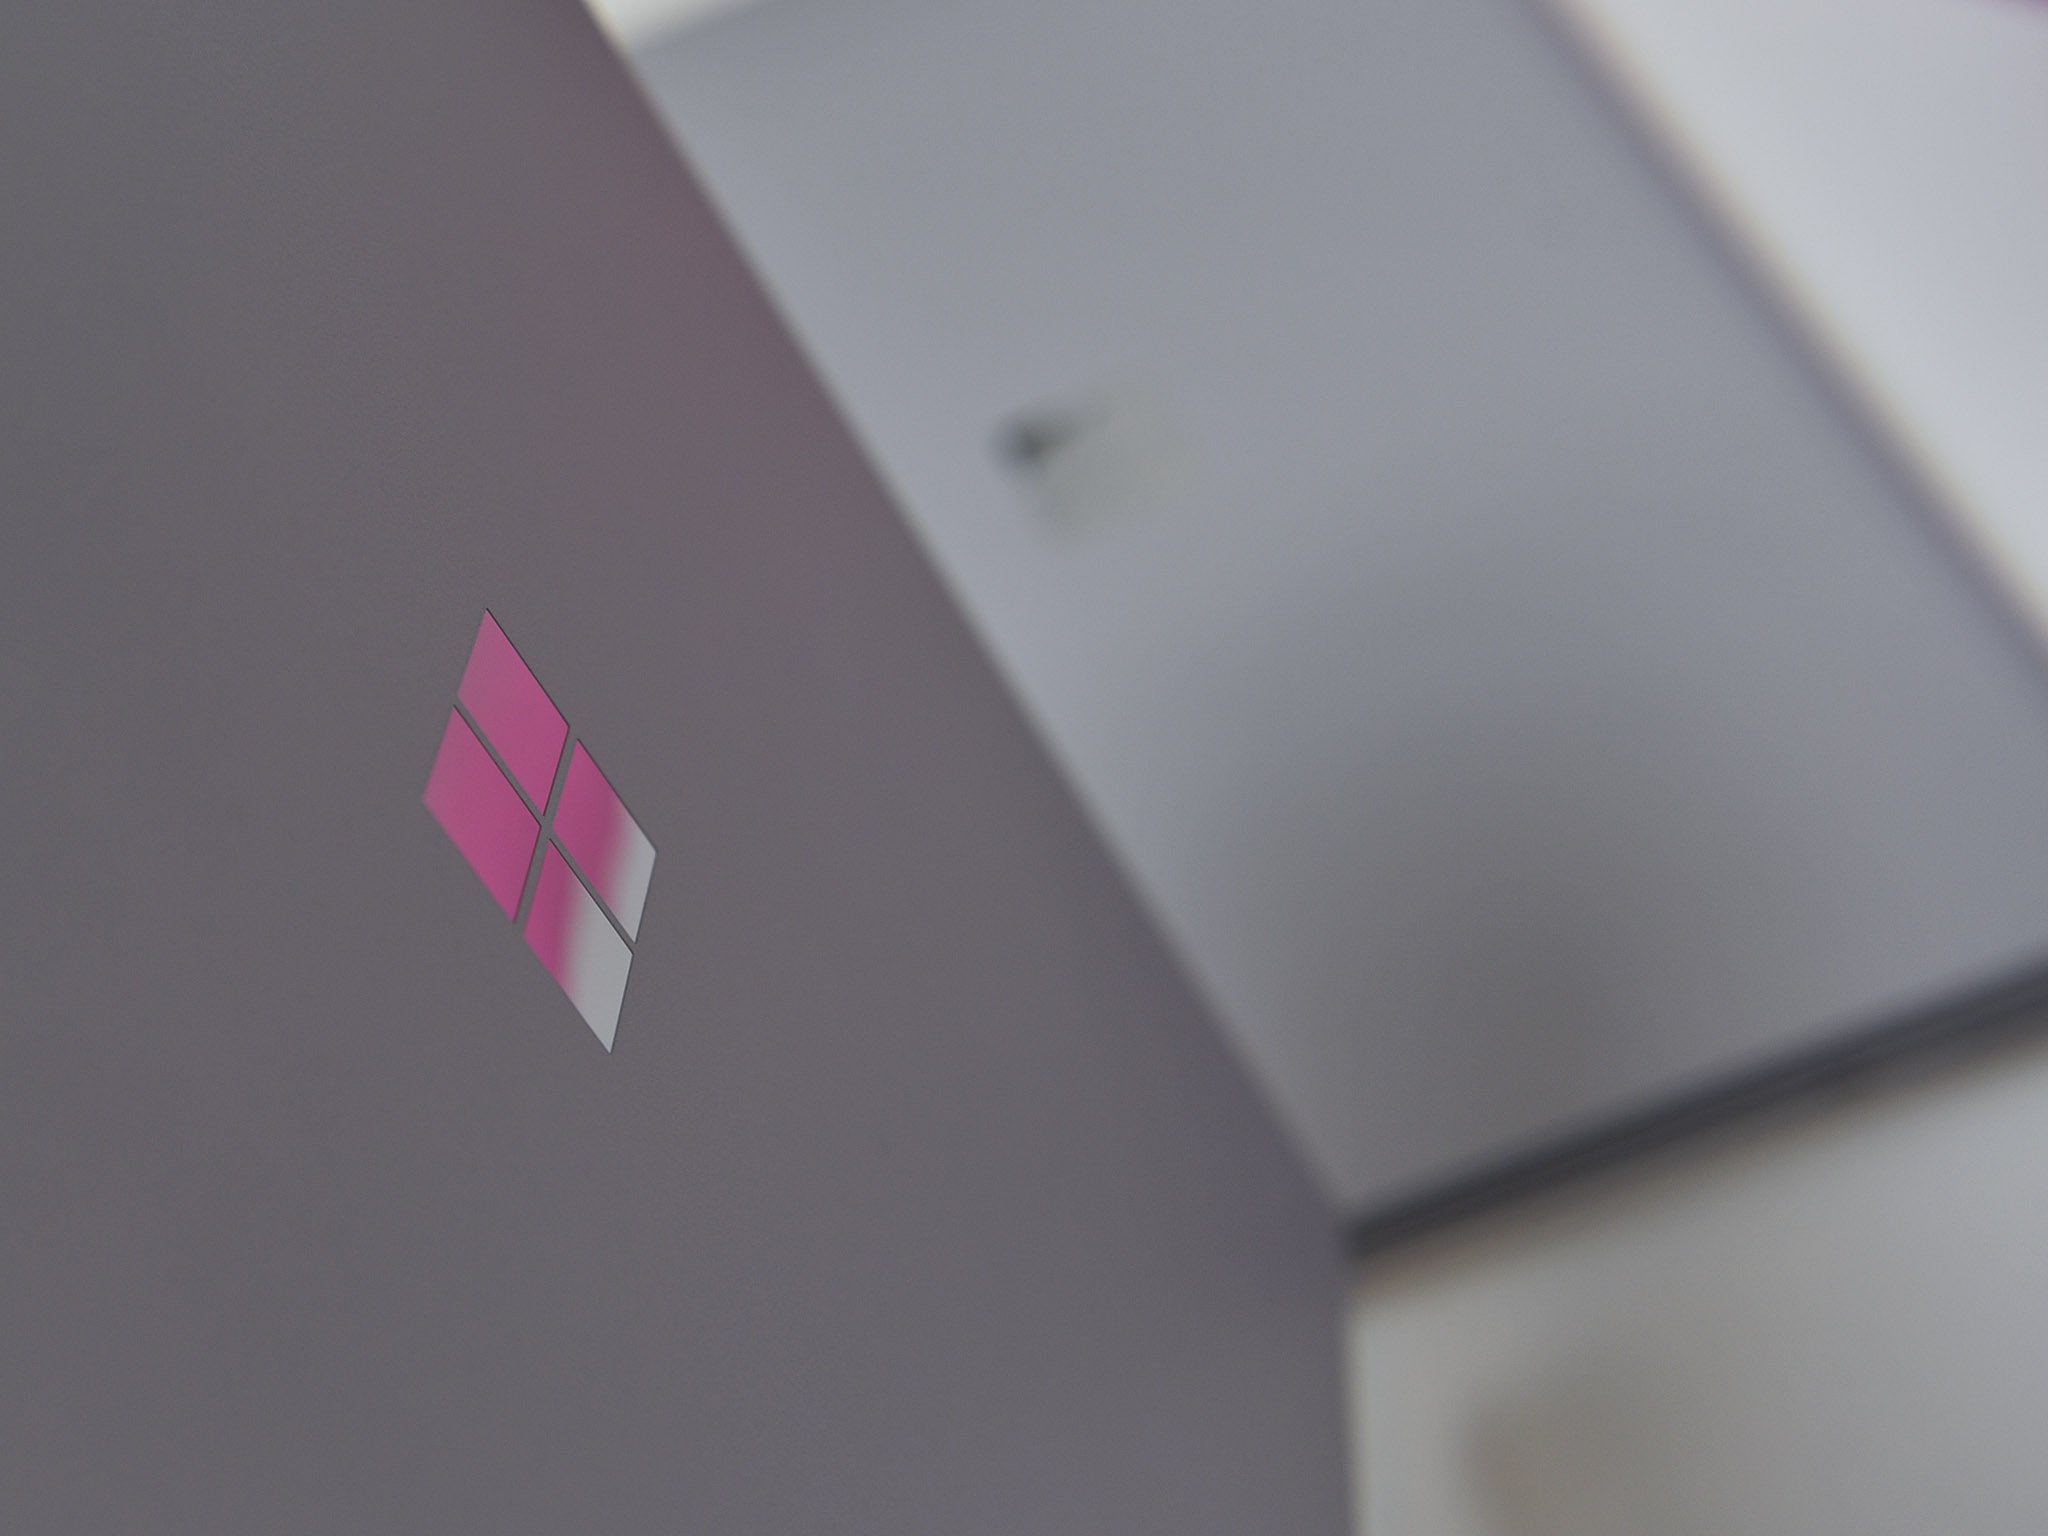 Microsoft reportedly teased dual-screen Surface 'Centaurus' for employees